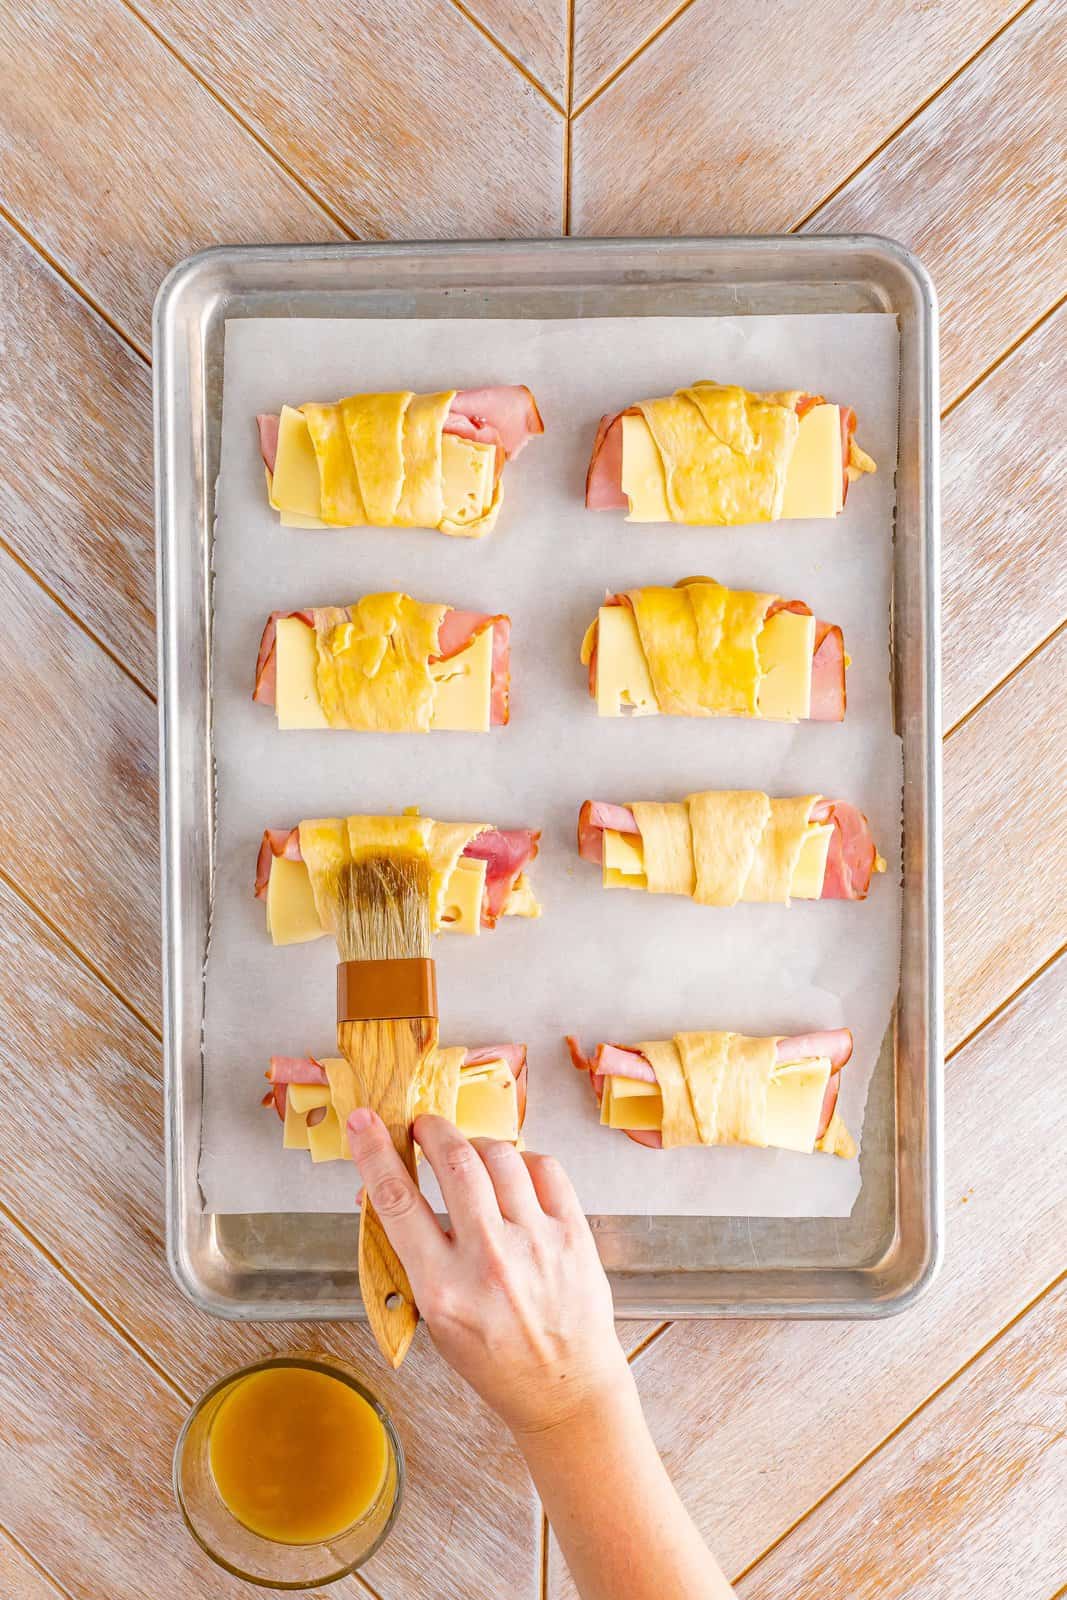 A hand brushing the butter on the stuffed ham and cheese rolls.